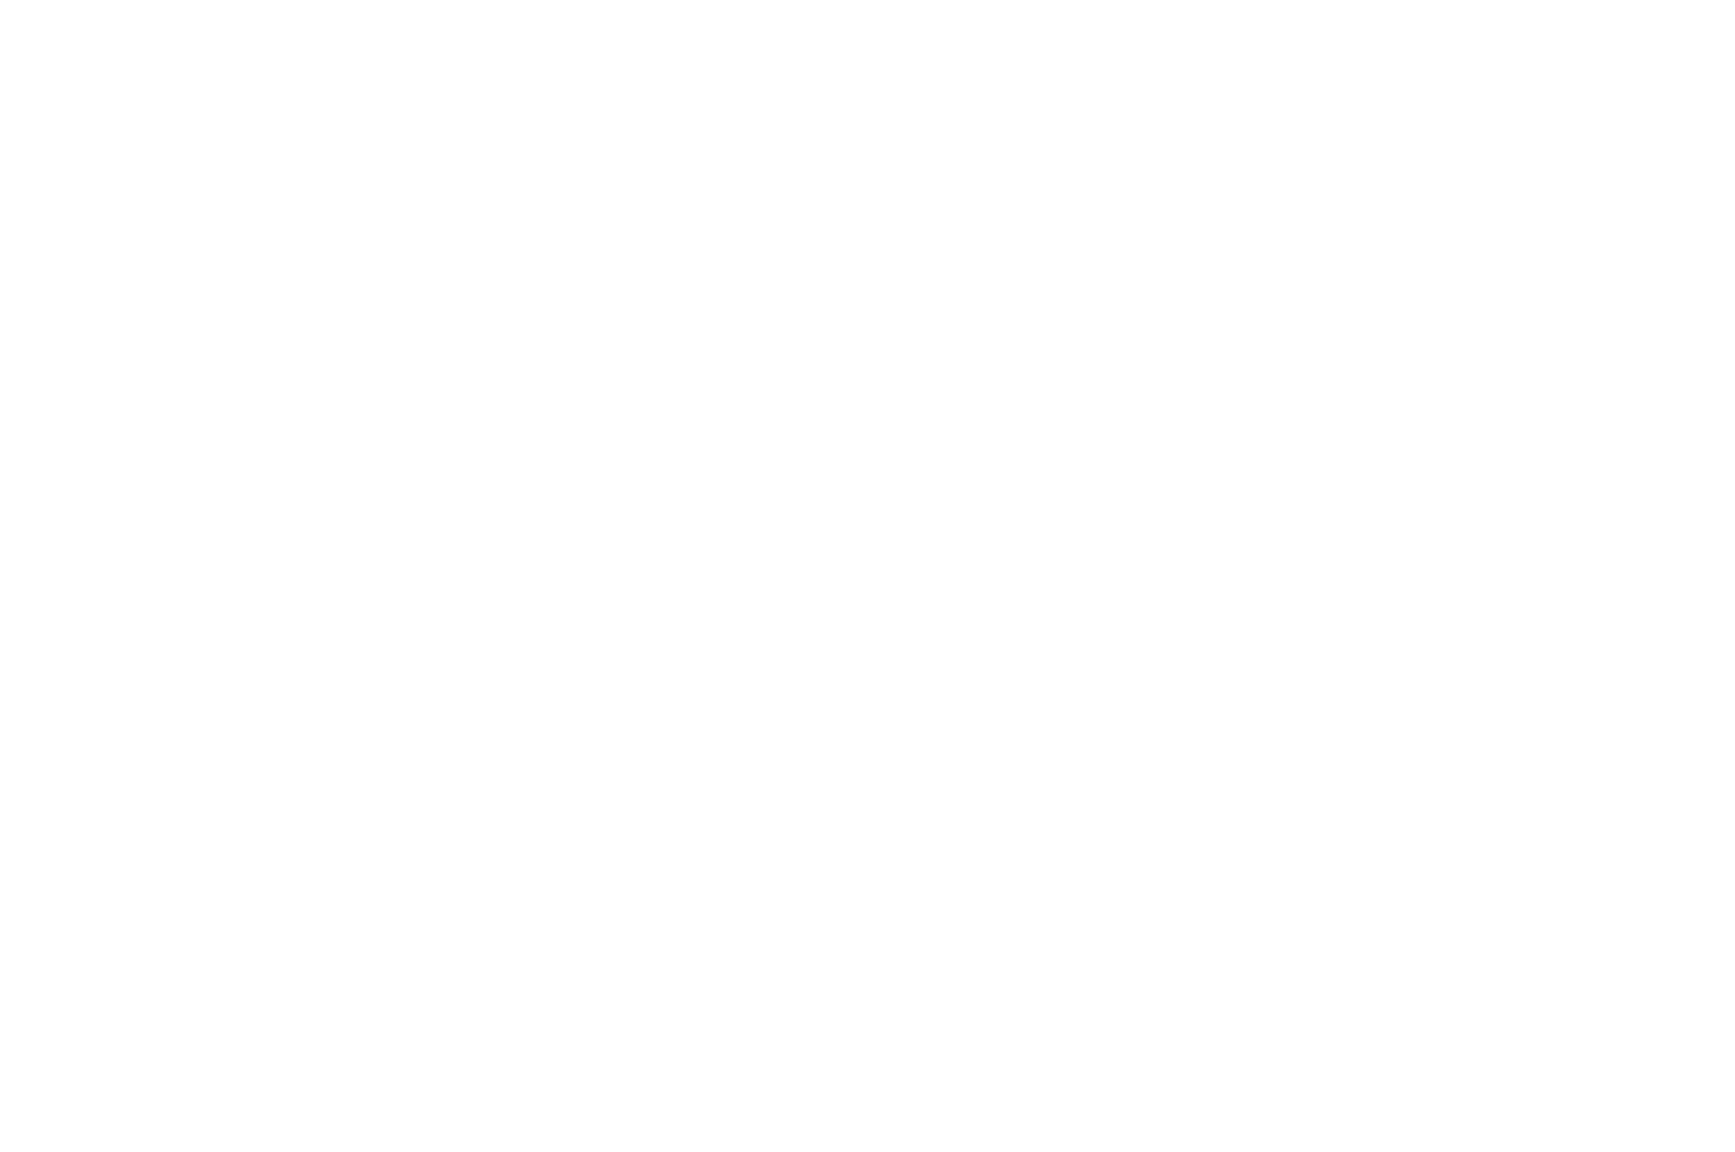 NOMINATED - BEST DIRECTOR SHORT FILM USA - NYCIFF 2016 (1).png